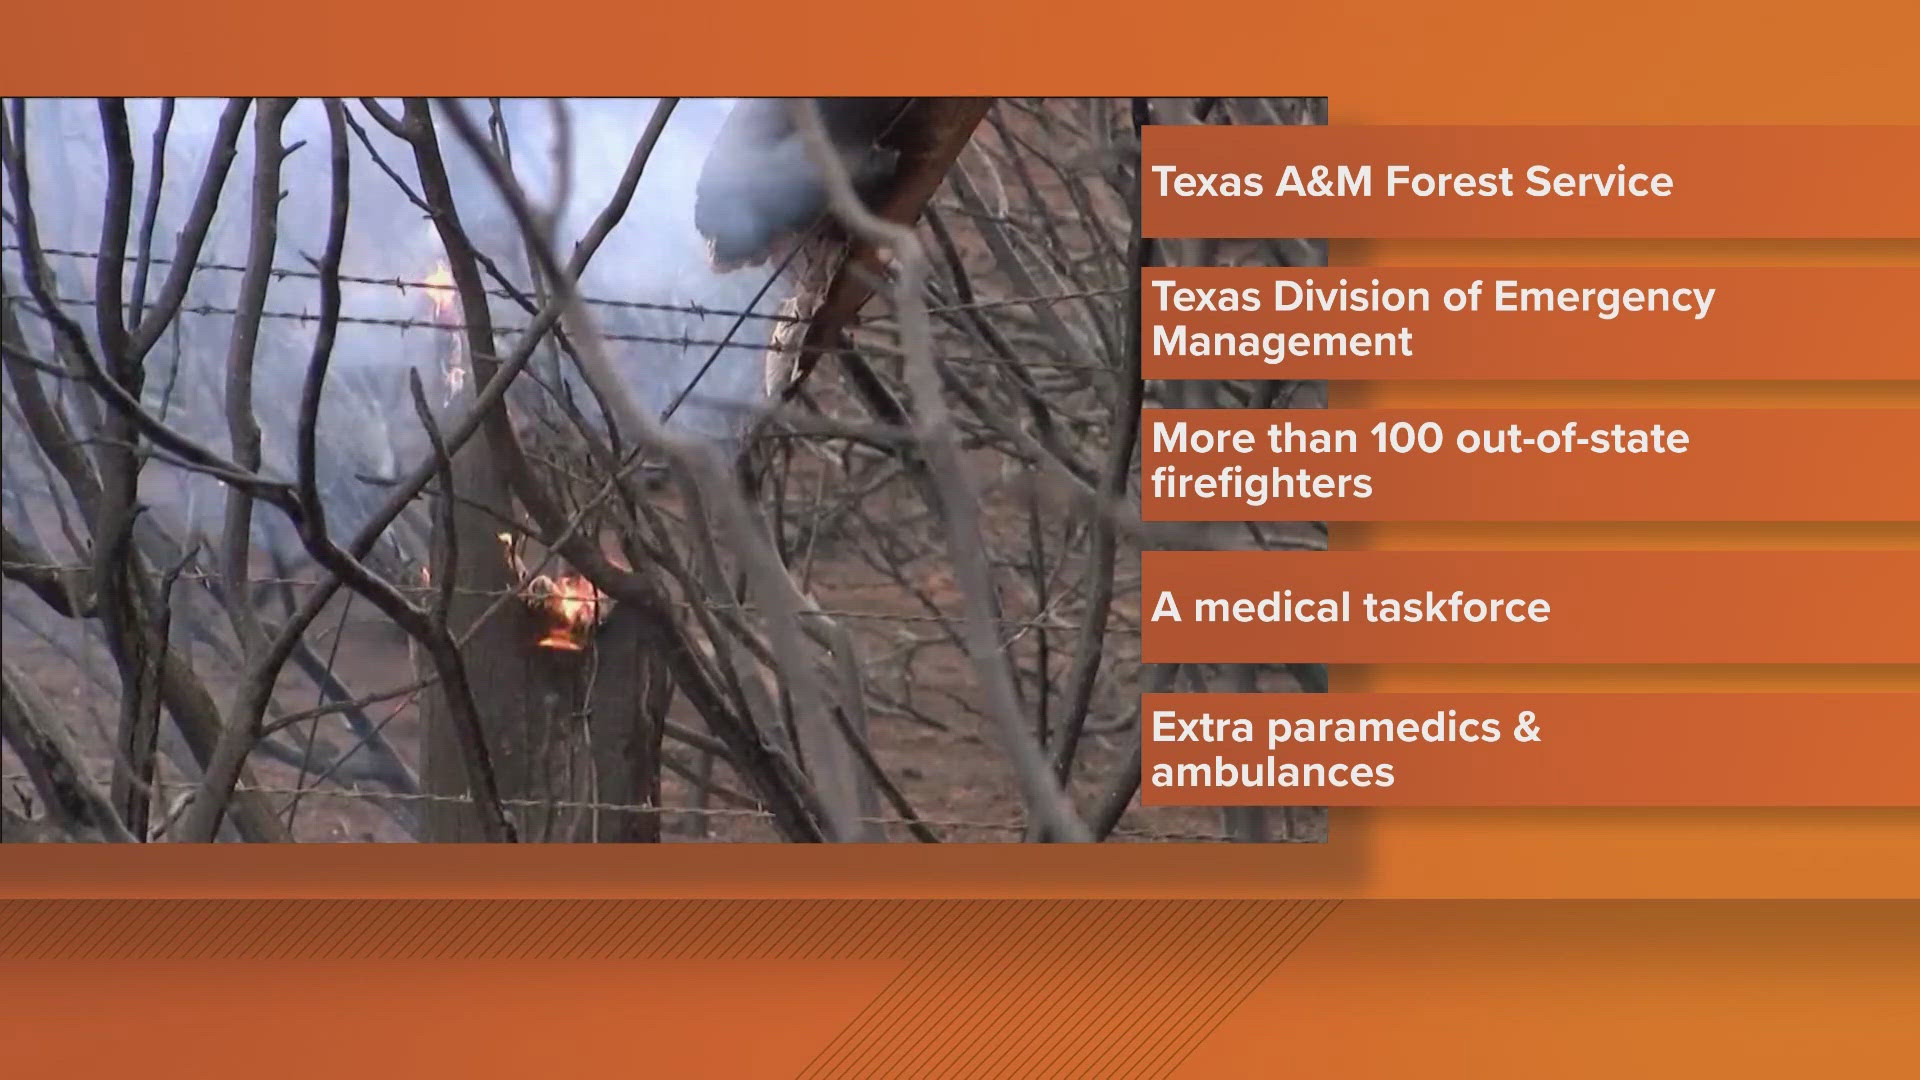 Resources have been set up with the Texas A&M Forest Service and the Texas Division of Emergency Management starting Wednesday.